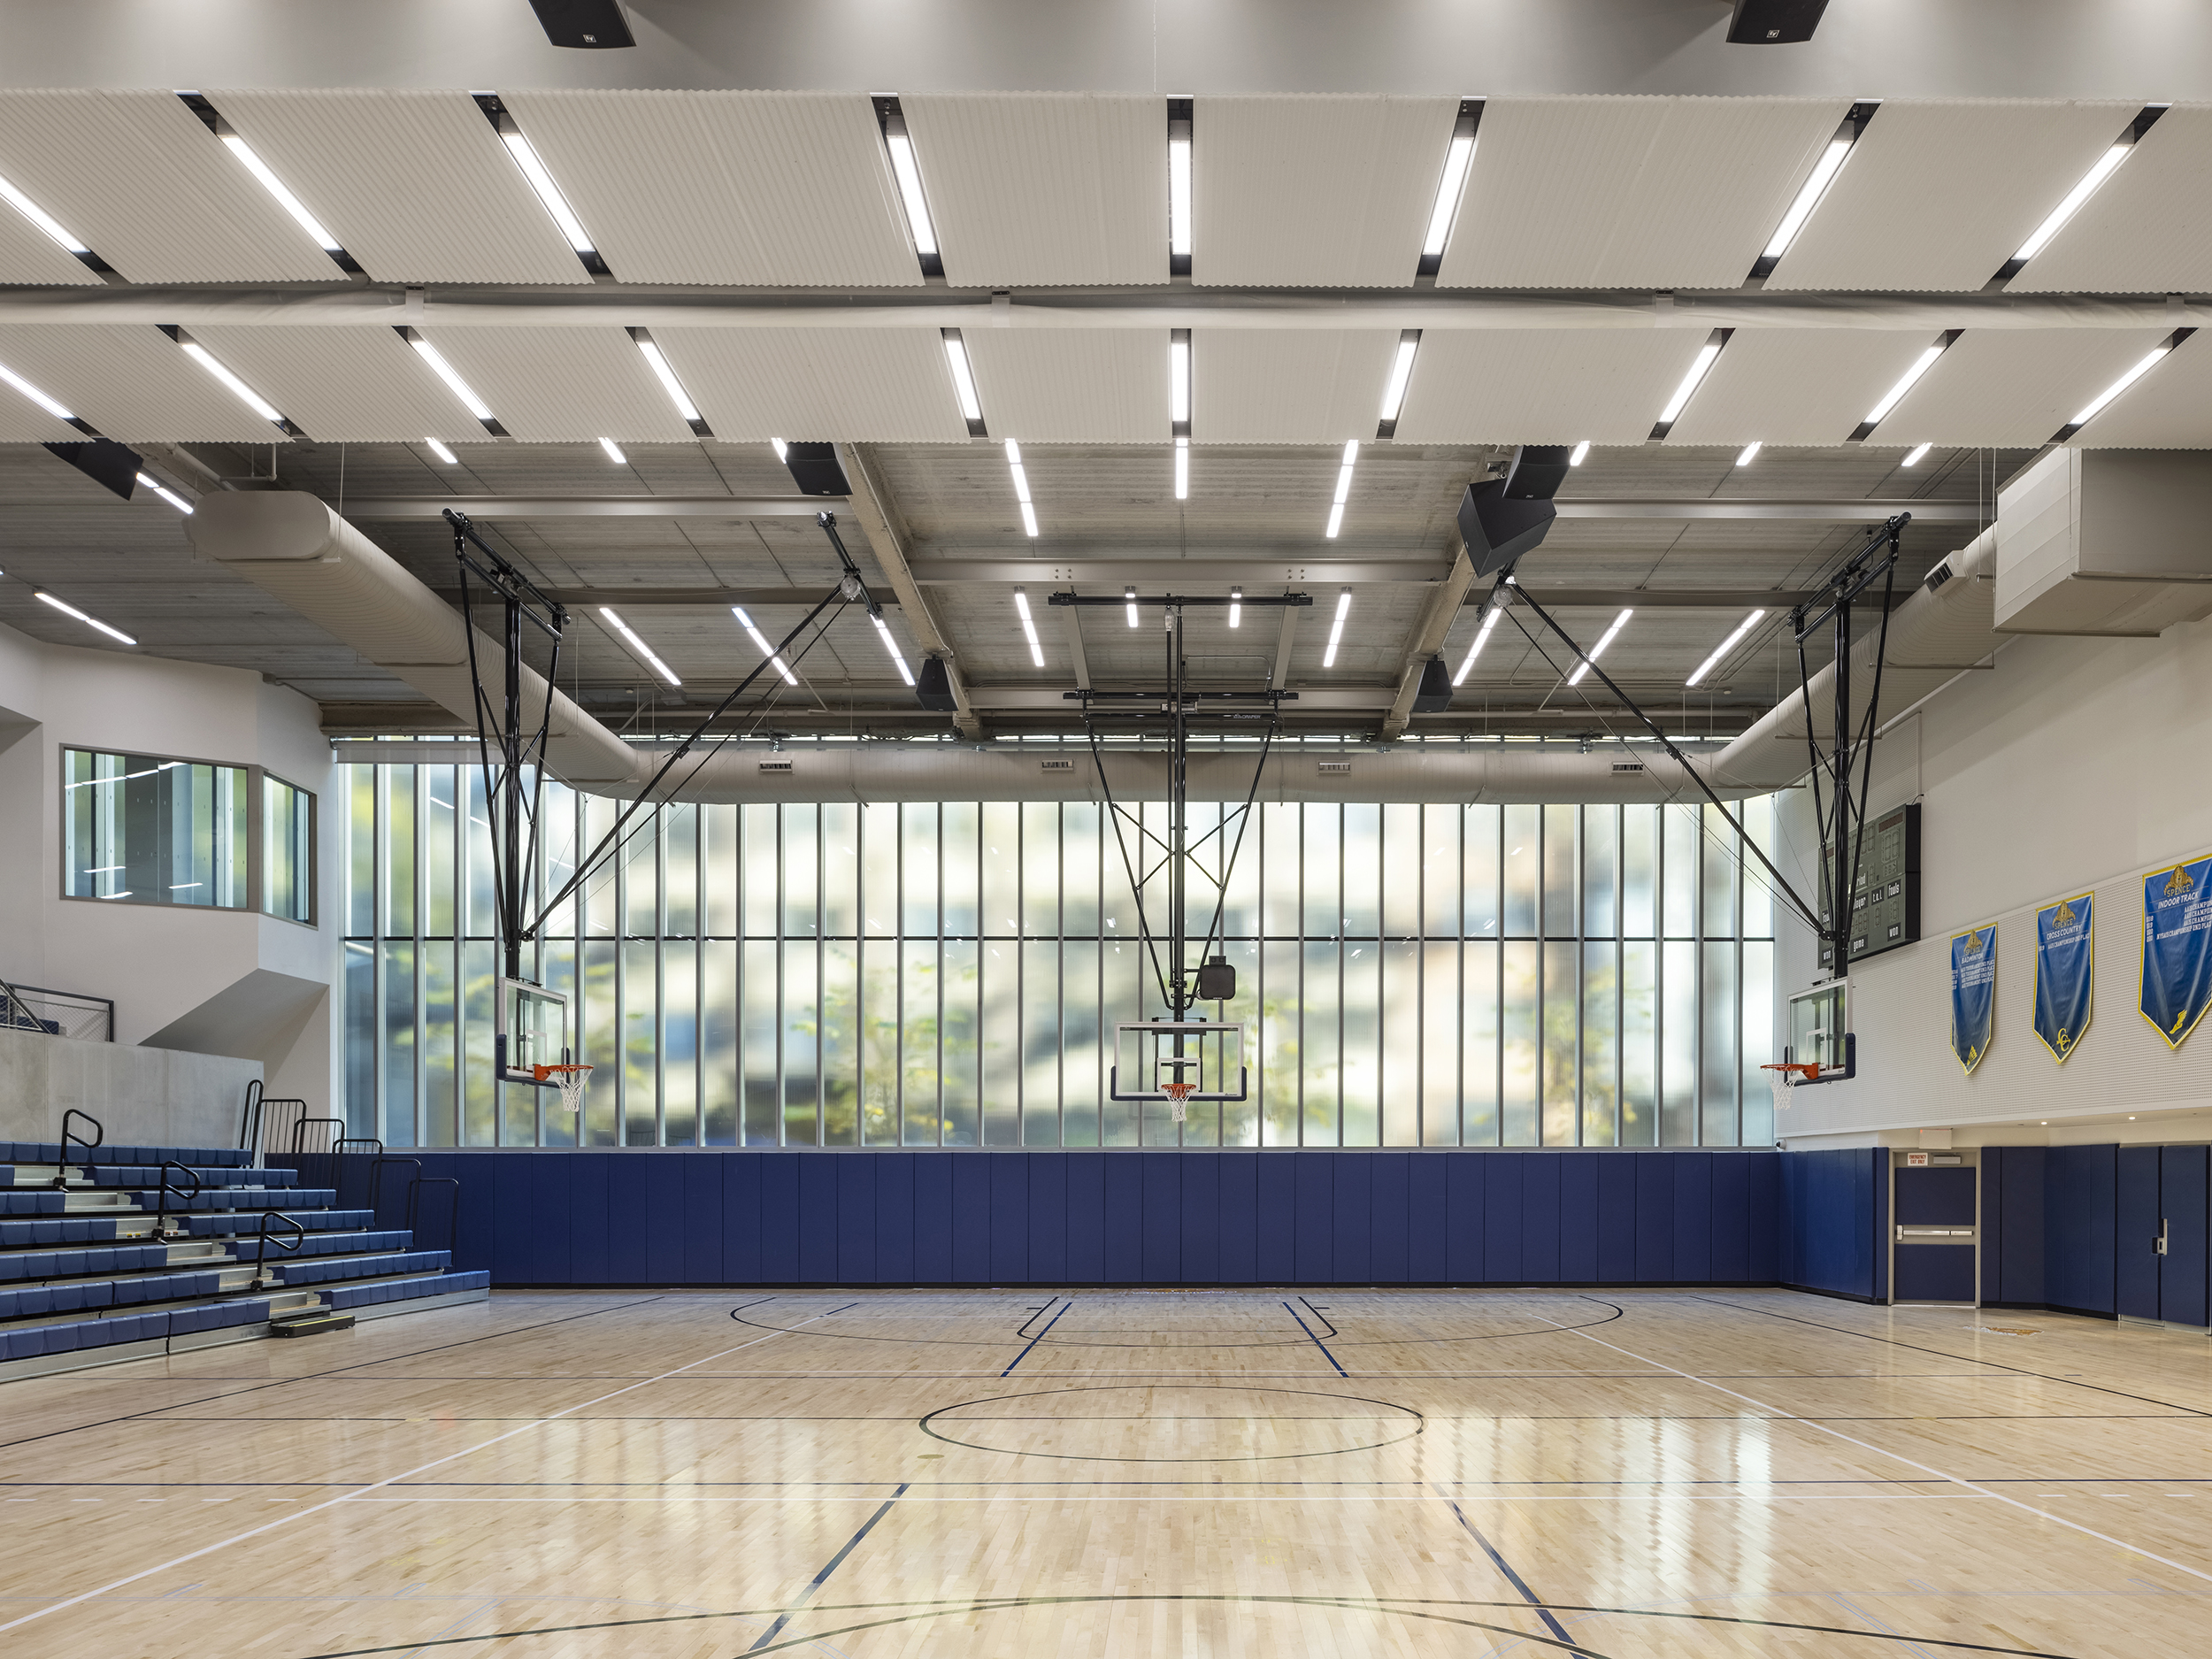 Spence School Athletic & Ecology Center